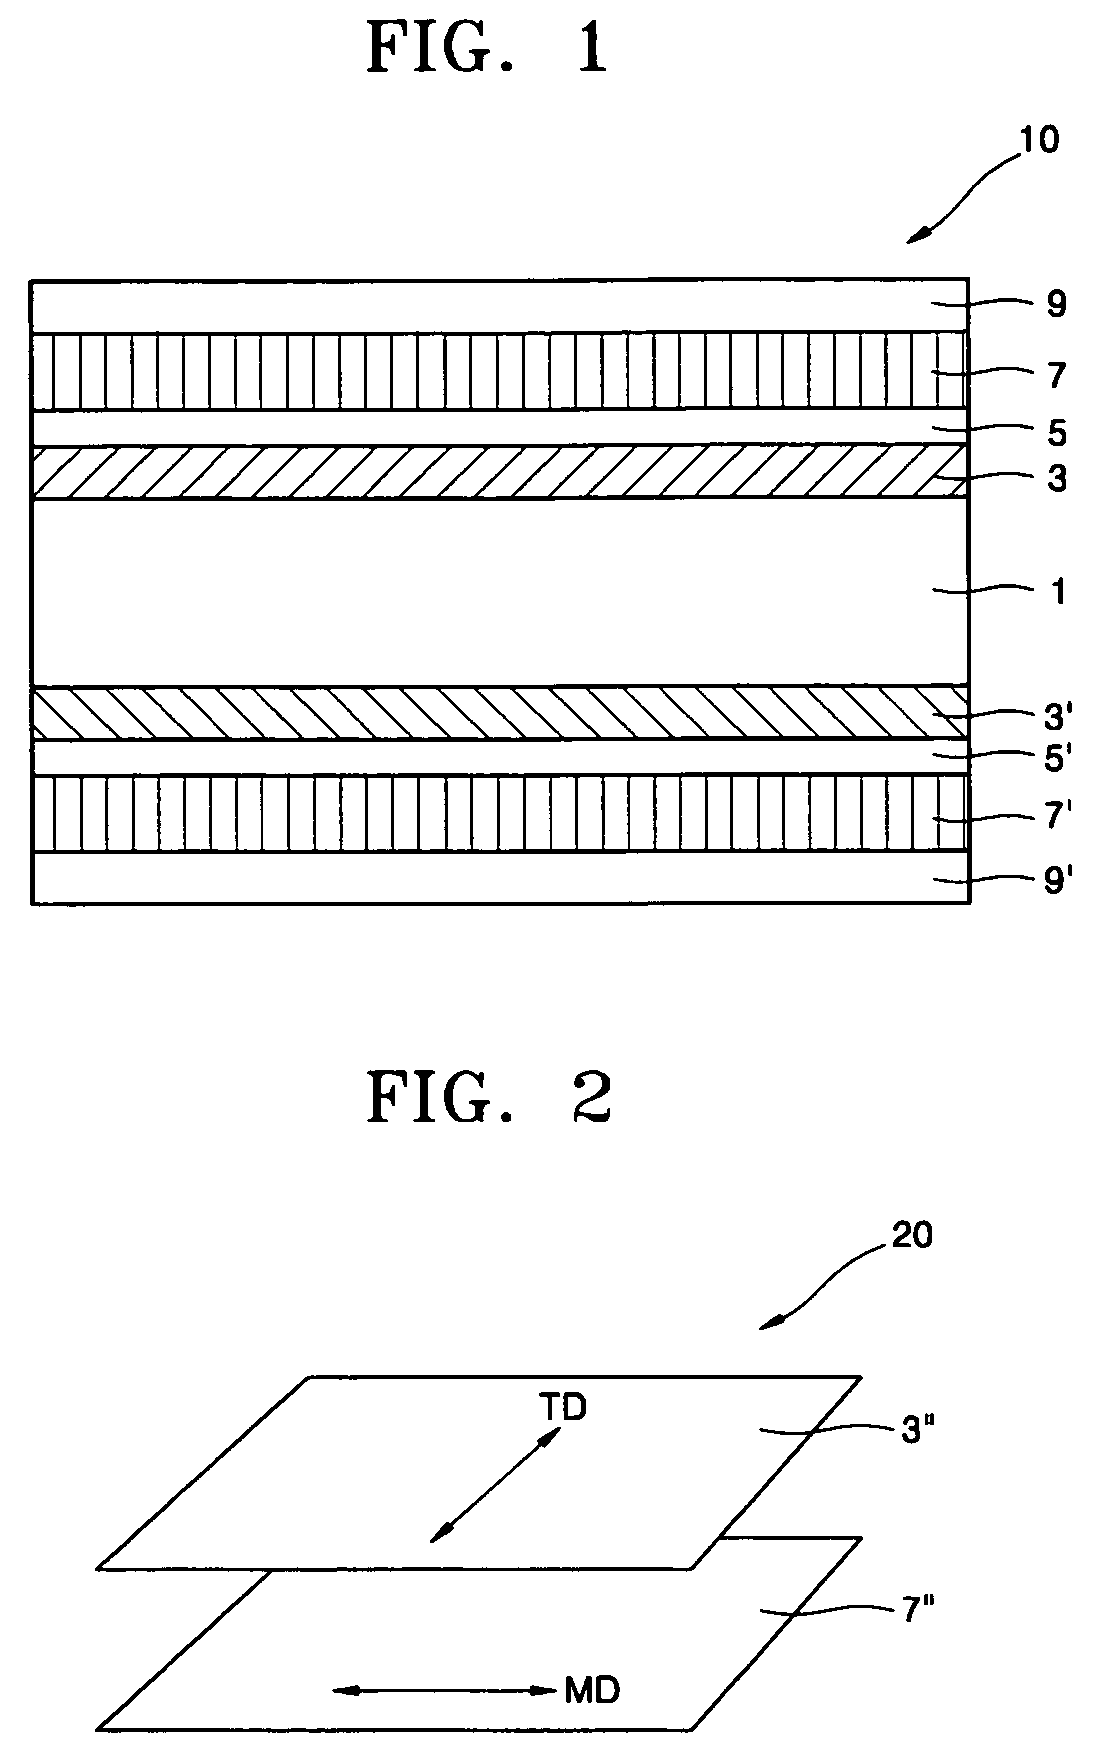 Biaxial-optical polynorbornene-based film and method of manufacturing the same, integrated optical compensation polarizer having the film and method of manufacturing the polarizer, and liquid crystal display panel containing the film and/or polarizer